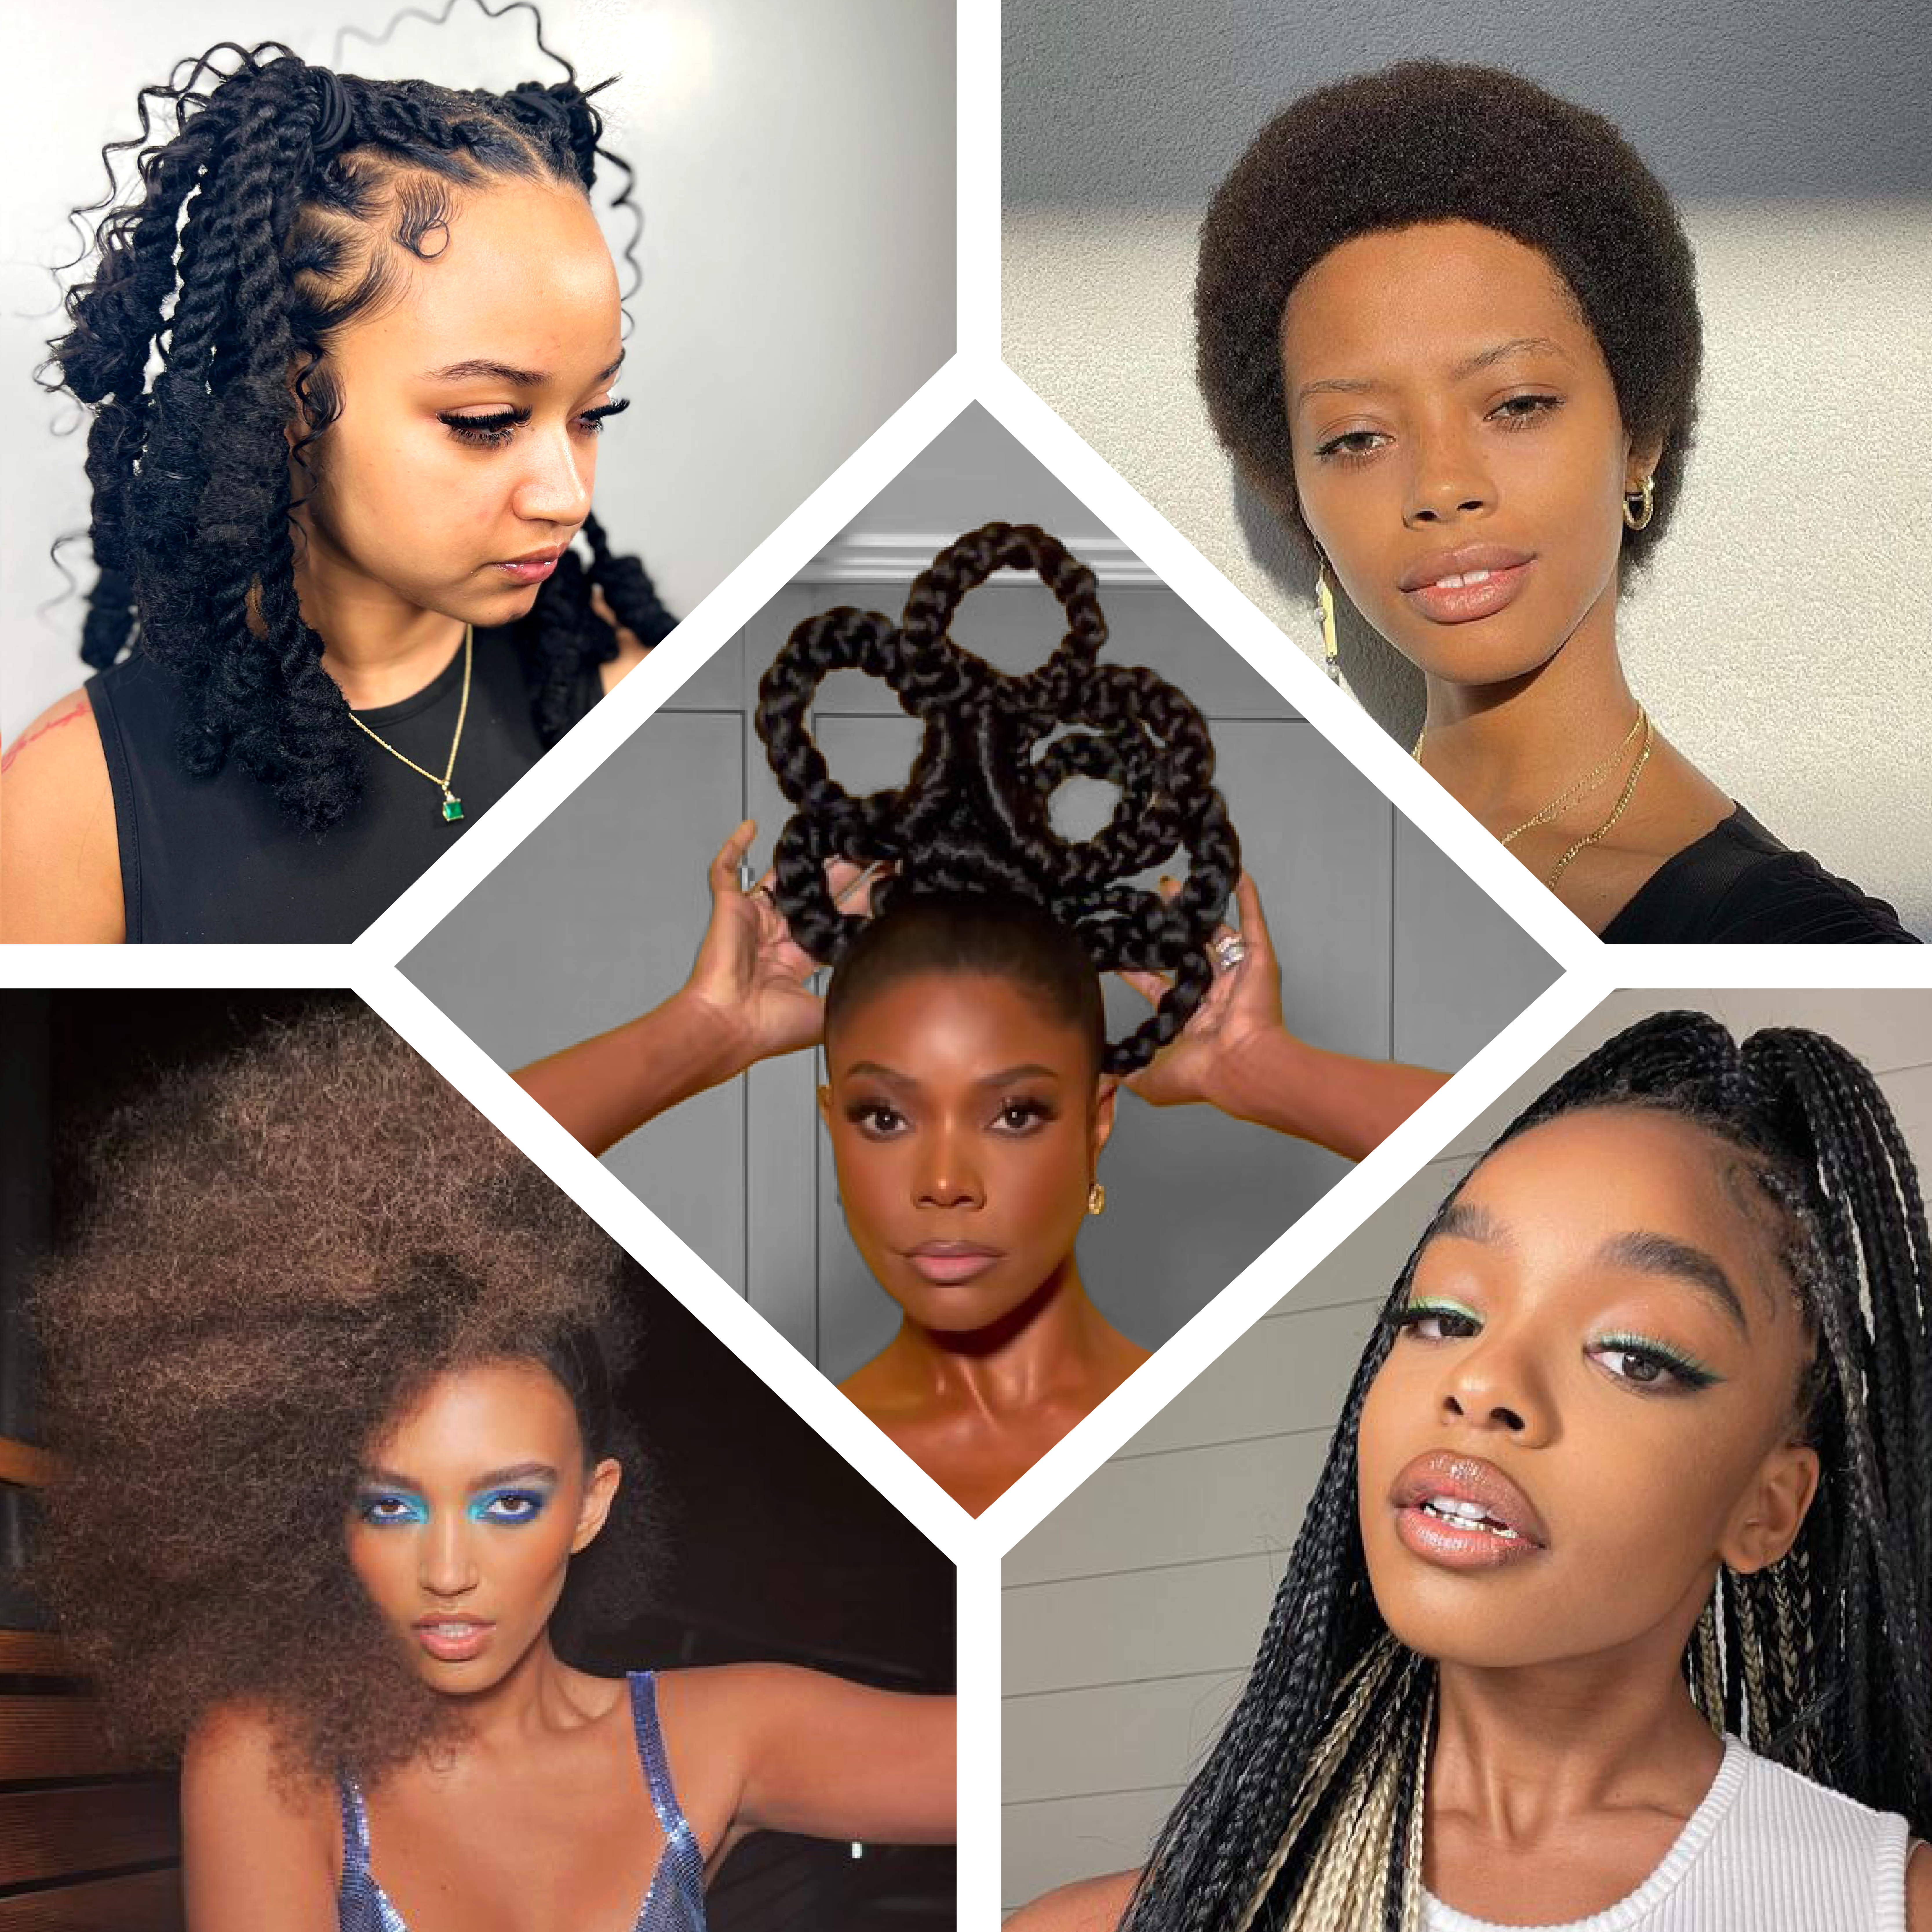 From Micro Braids to Invisible Locs—These 5 Natural Hairstyles Are